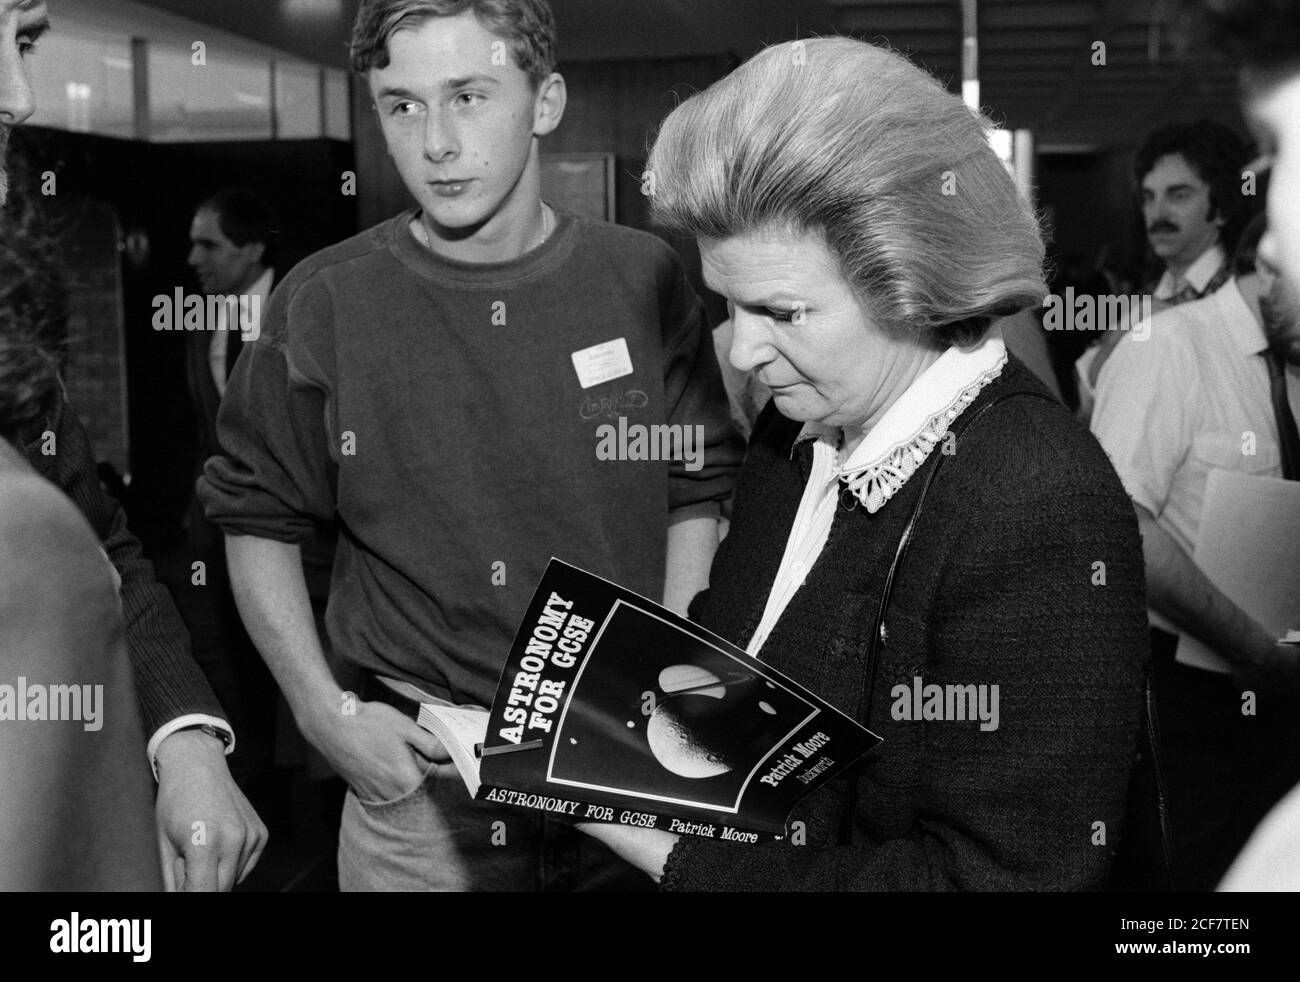 Soviet cosmonaut Valentina Tereshkova, the first woman in space, visits “Space School” at Brunel University, Wilfred Brown Building, Cleveland Road, Uxbridge. 10 April 1992. Photo: Neil Turner Stock Photo